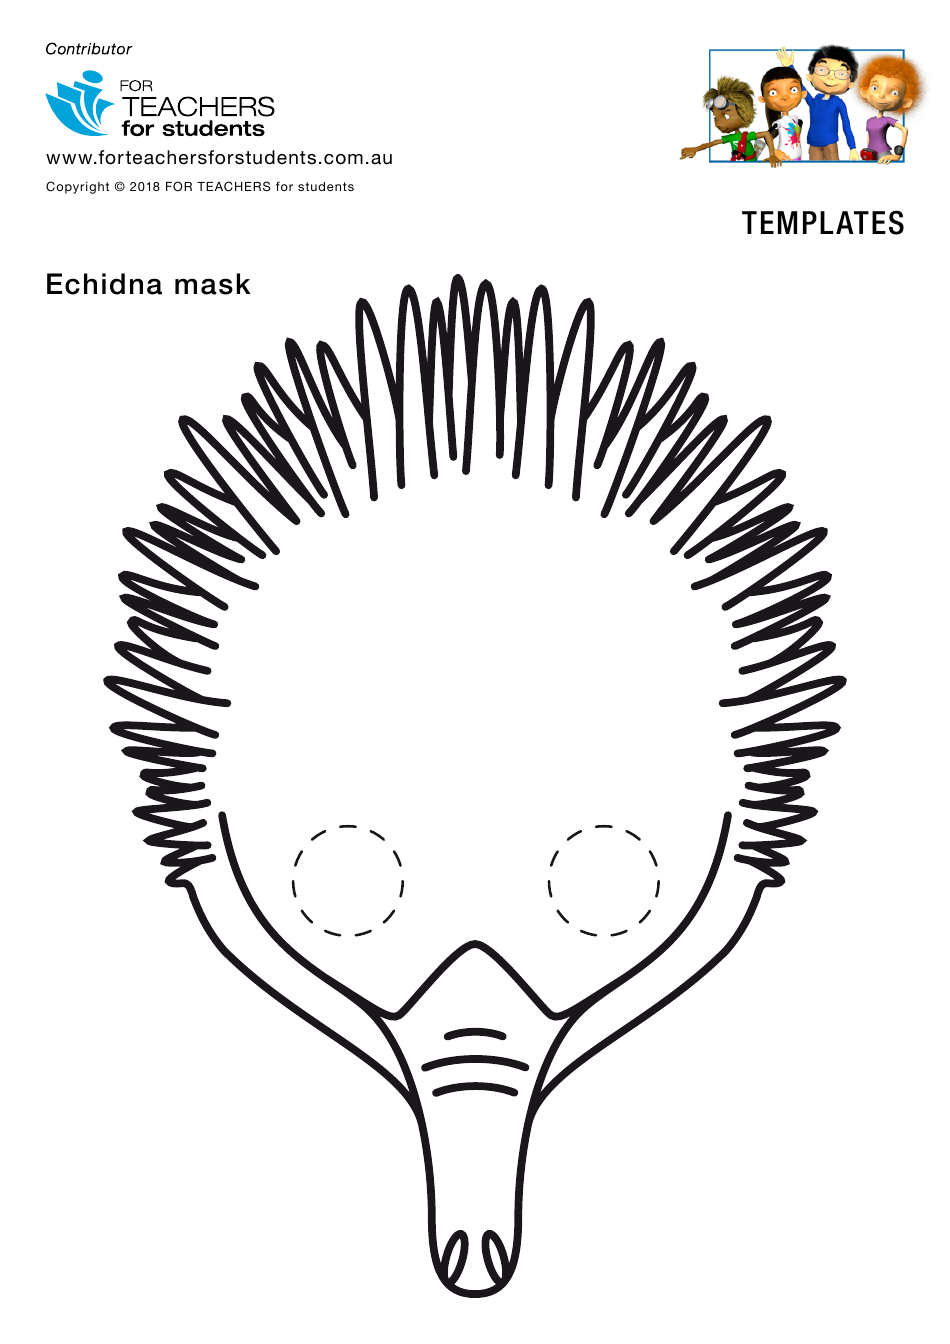 Echidna Mask Coloring Template, Page 1